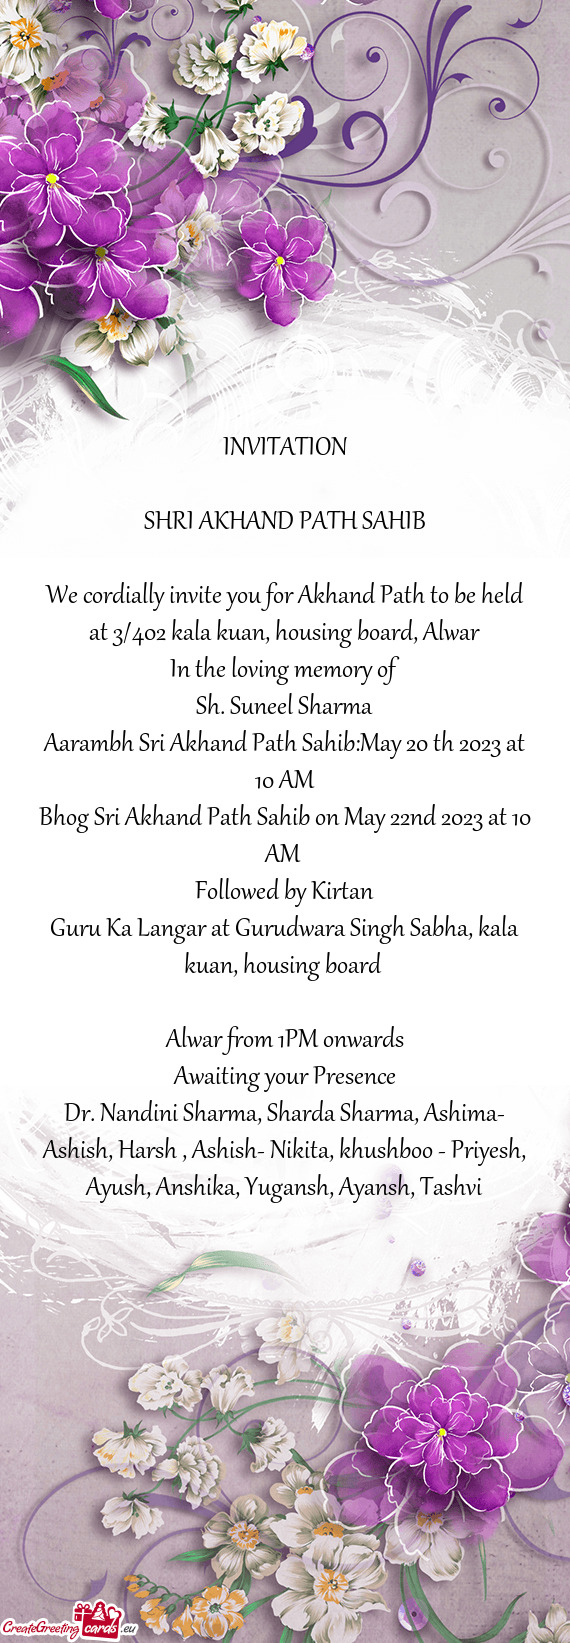 We cordially invite you for Akhand Path to be held at 3/402 kala kuan, housing board, Alwar